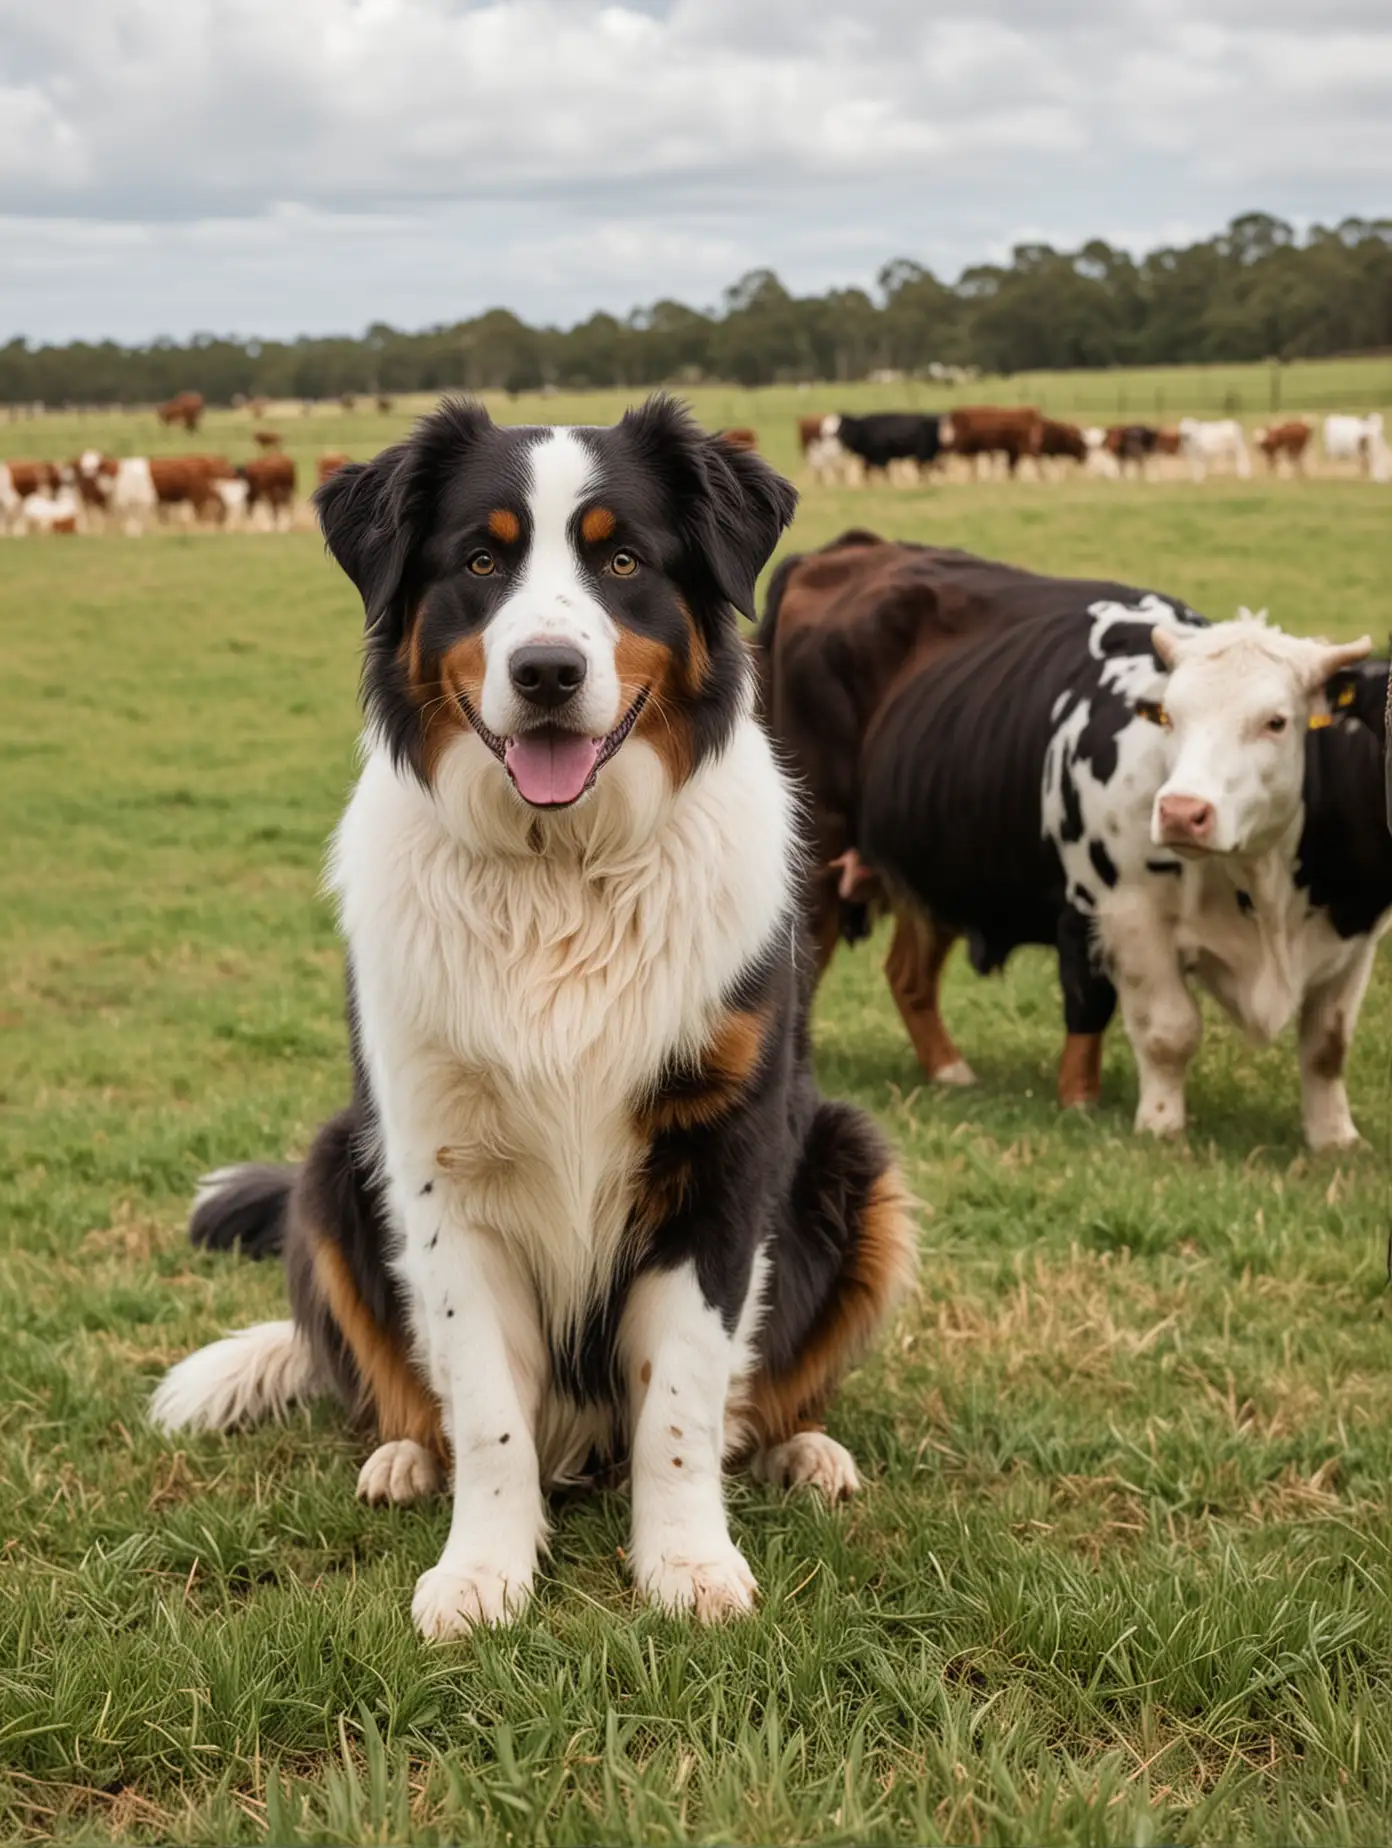 Australian Shepherd Dogs Sitting with Angus Cattle in Pastoral Scene